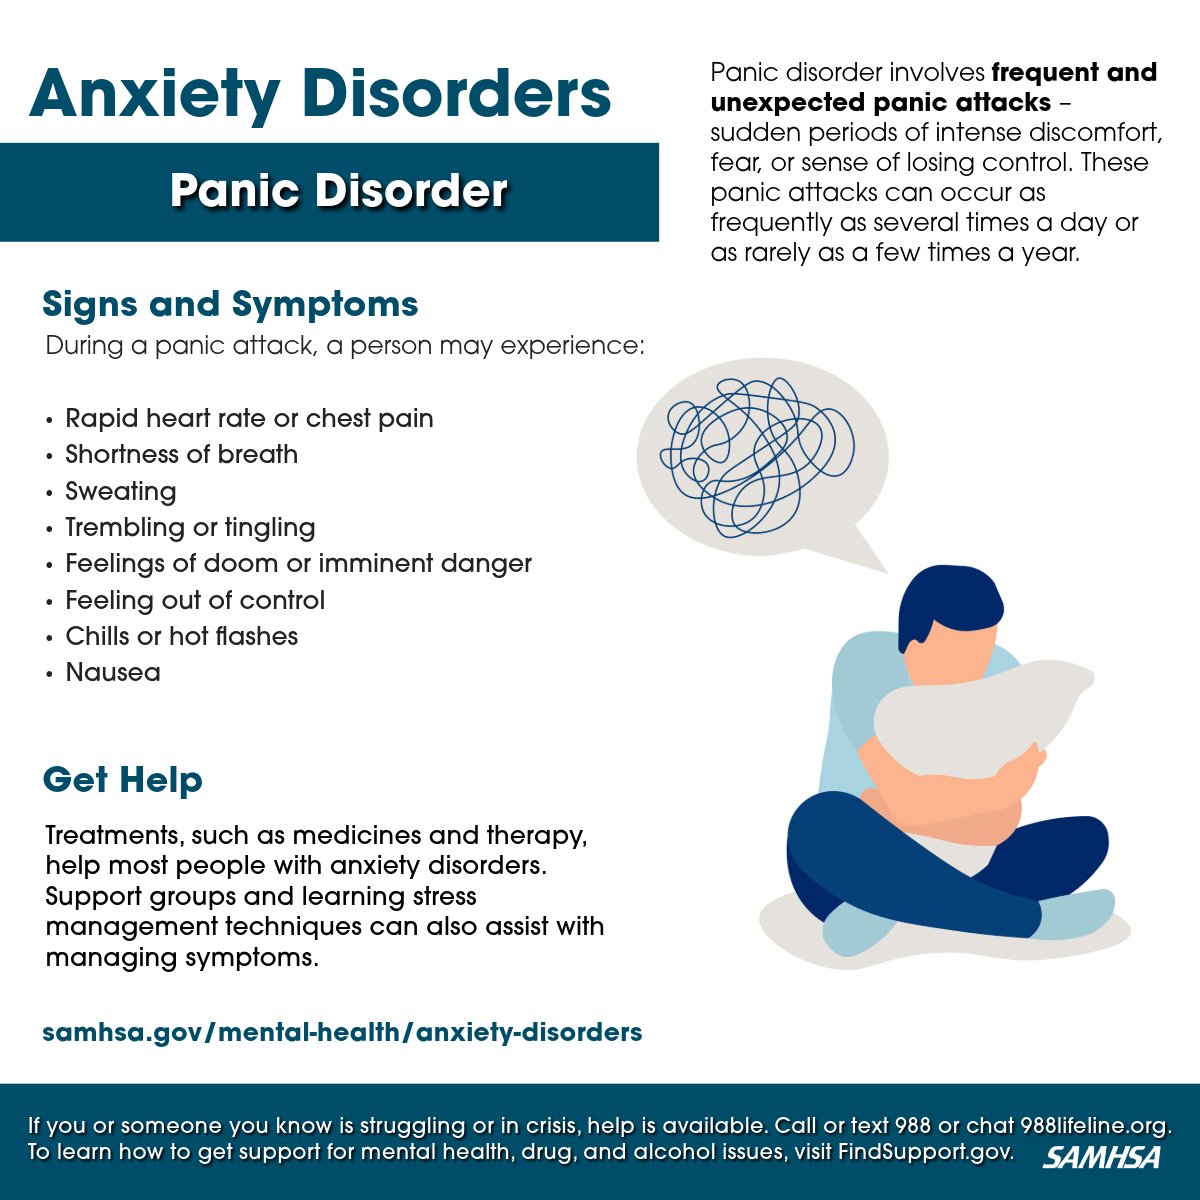 Occasional anxiety is an expected part of life. But anxiety disorders—like panic disorder— involve more than temporary worry or fear. Learn about the signs & symptoms of panic disorder and find treatment & support for yourself or loves ones: samhsa.gov/mental-health/… #MHAM2024